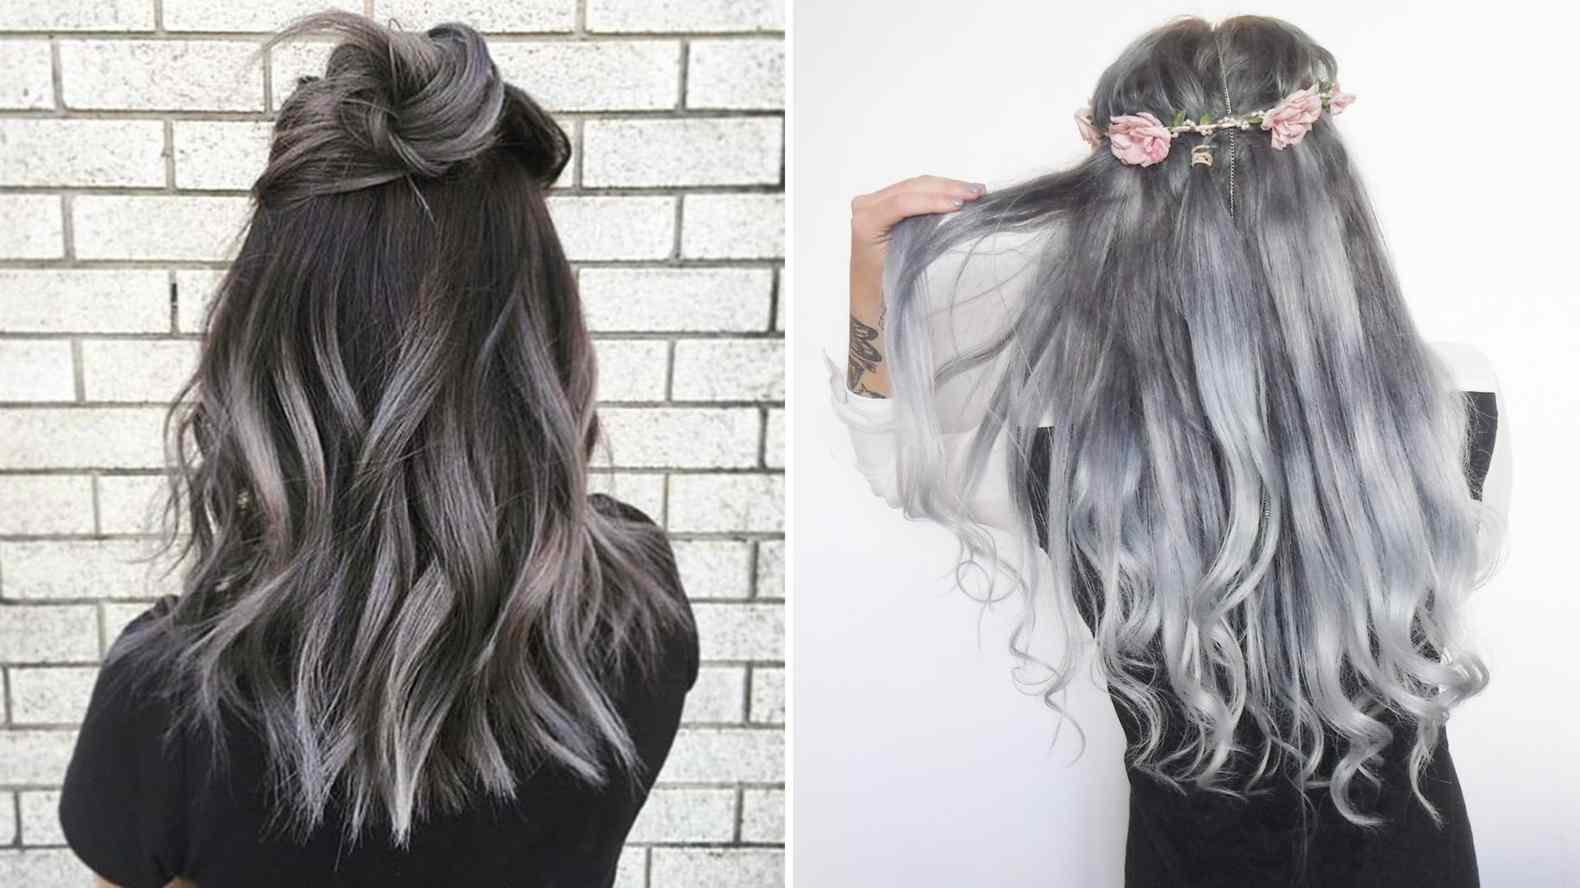 Hair silver color gray black hair color Ombre dark hire Hair accessories Hairband